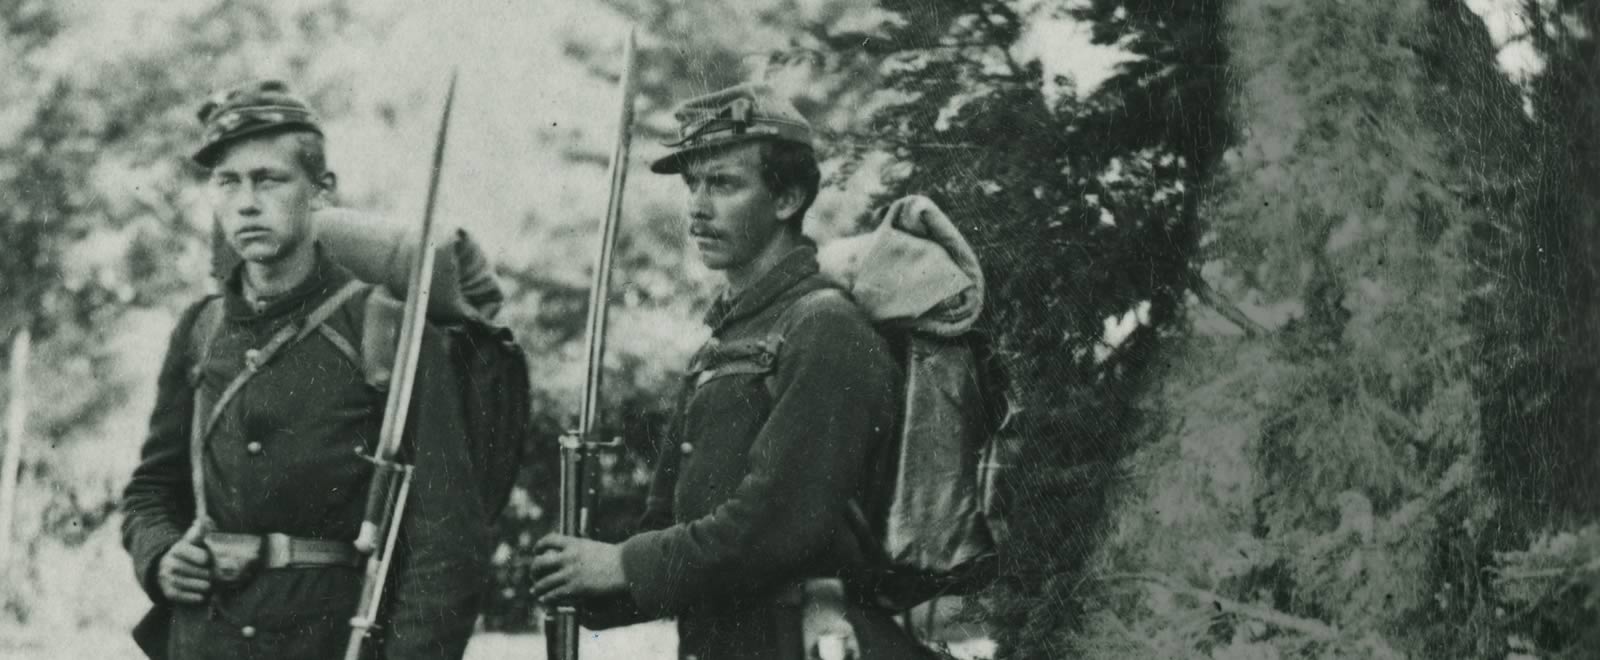 Two American Civil War soldiers standing by a large tree